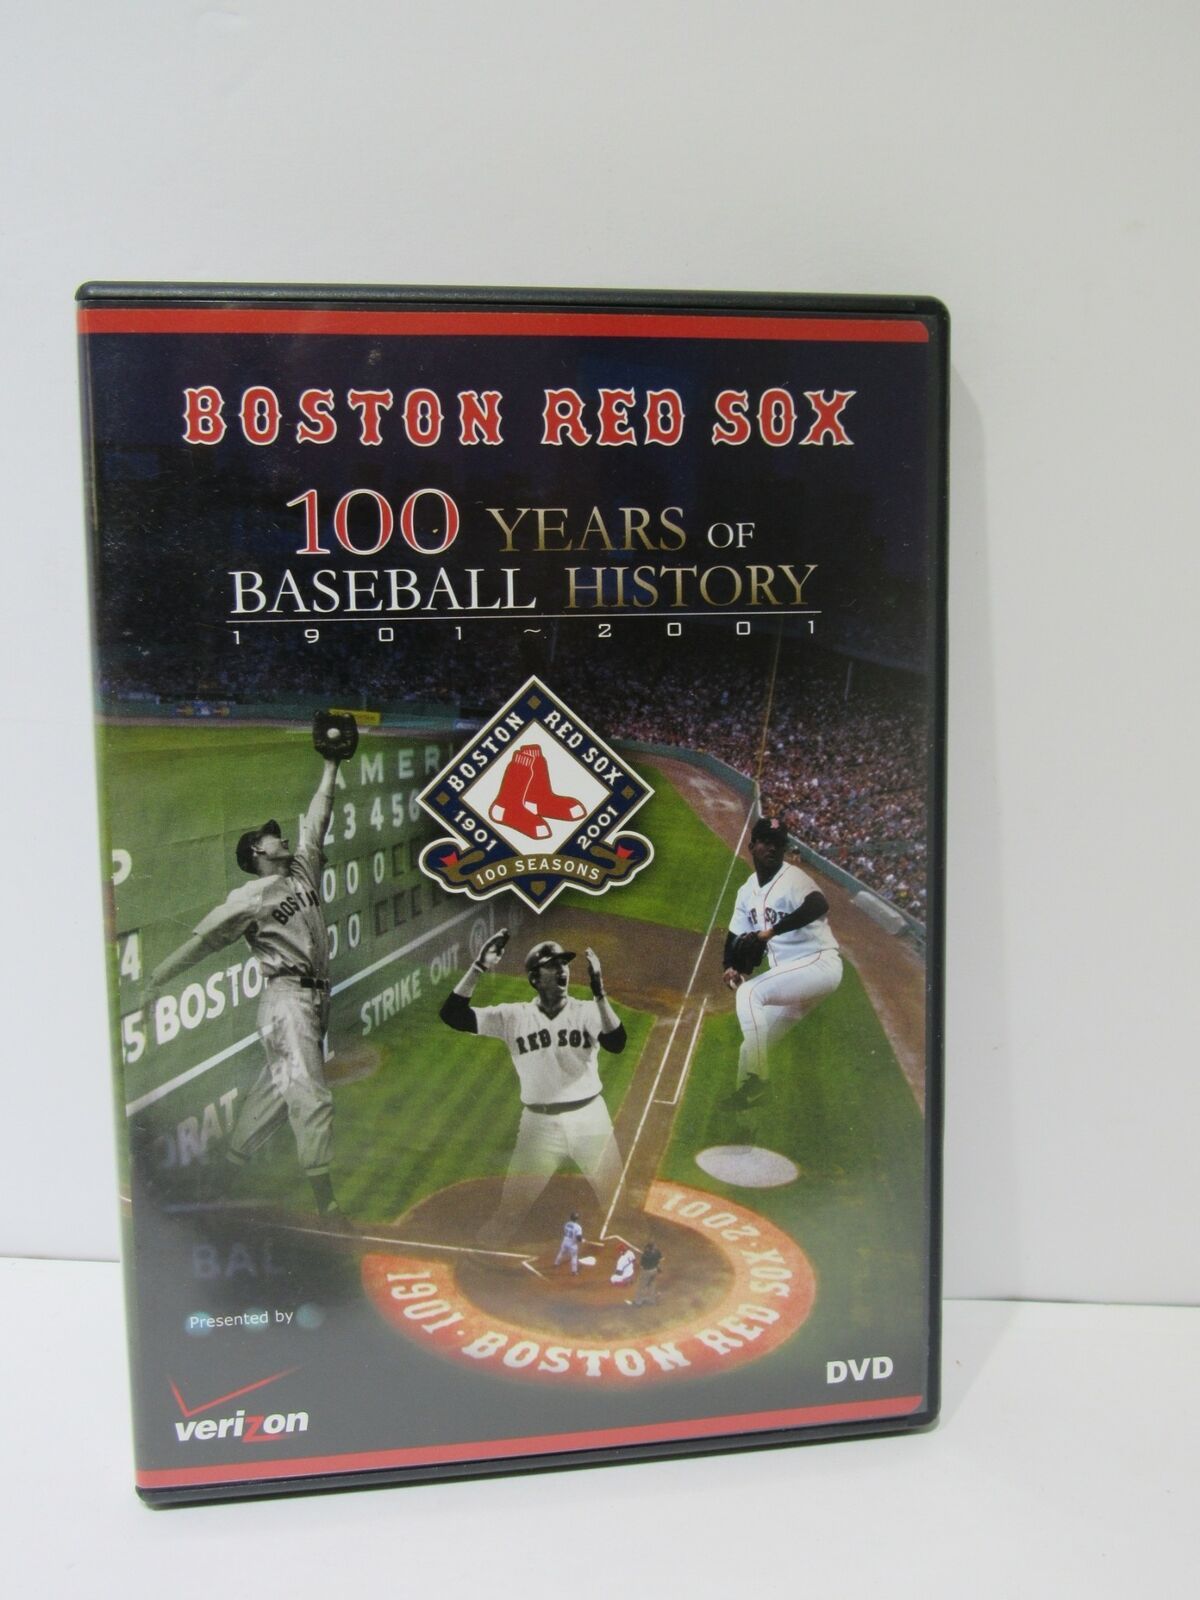 Primary image for Boston Red Sox: 100 Years of Baseball History (2001) DVD